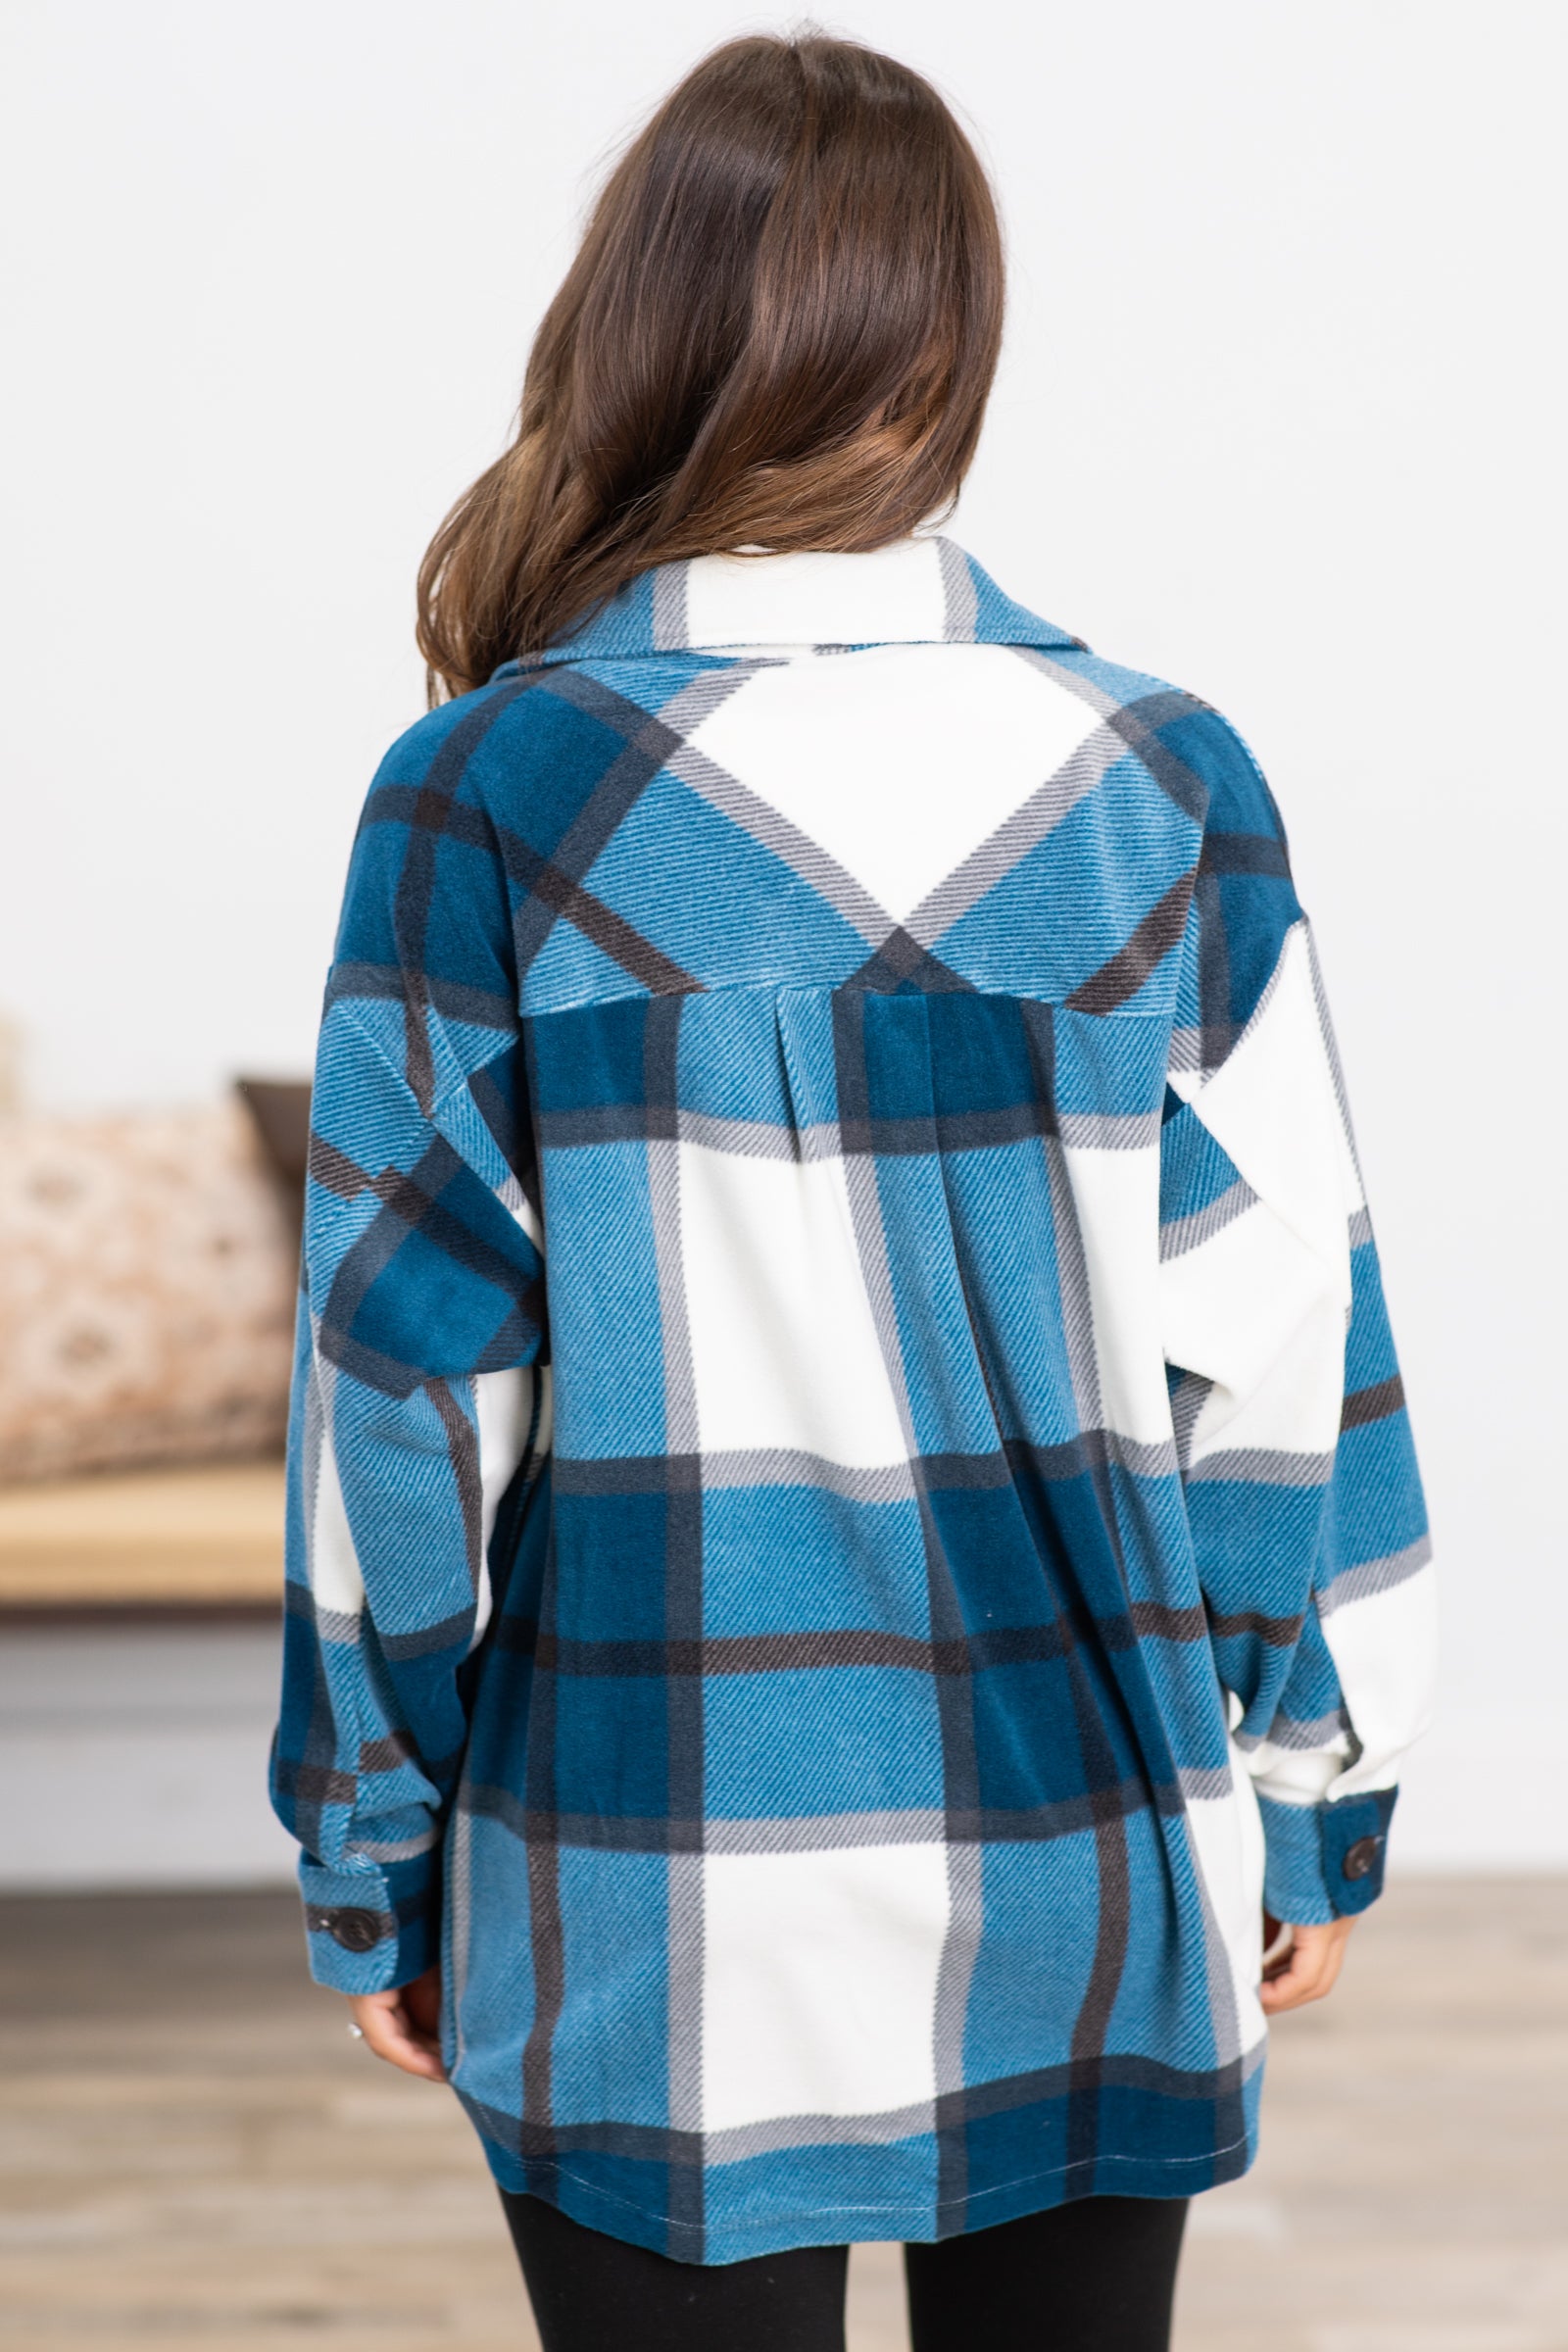 Teal and Off White Plaid Shacket